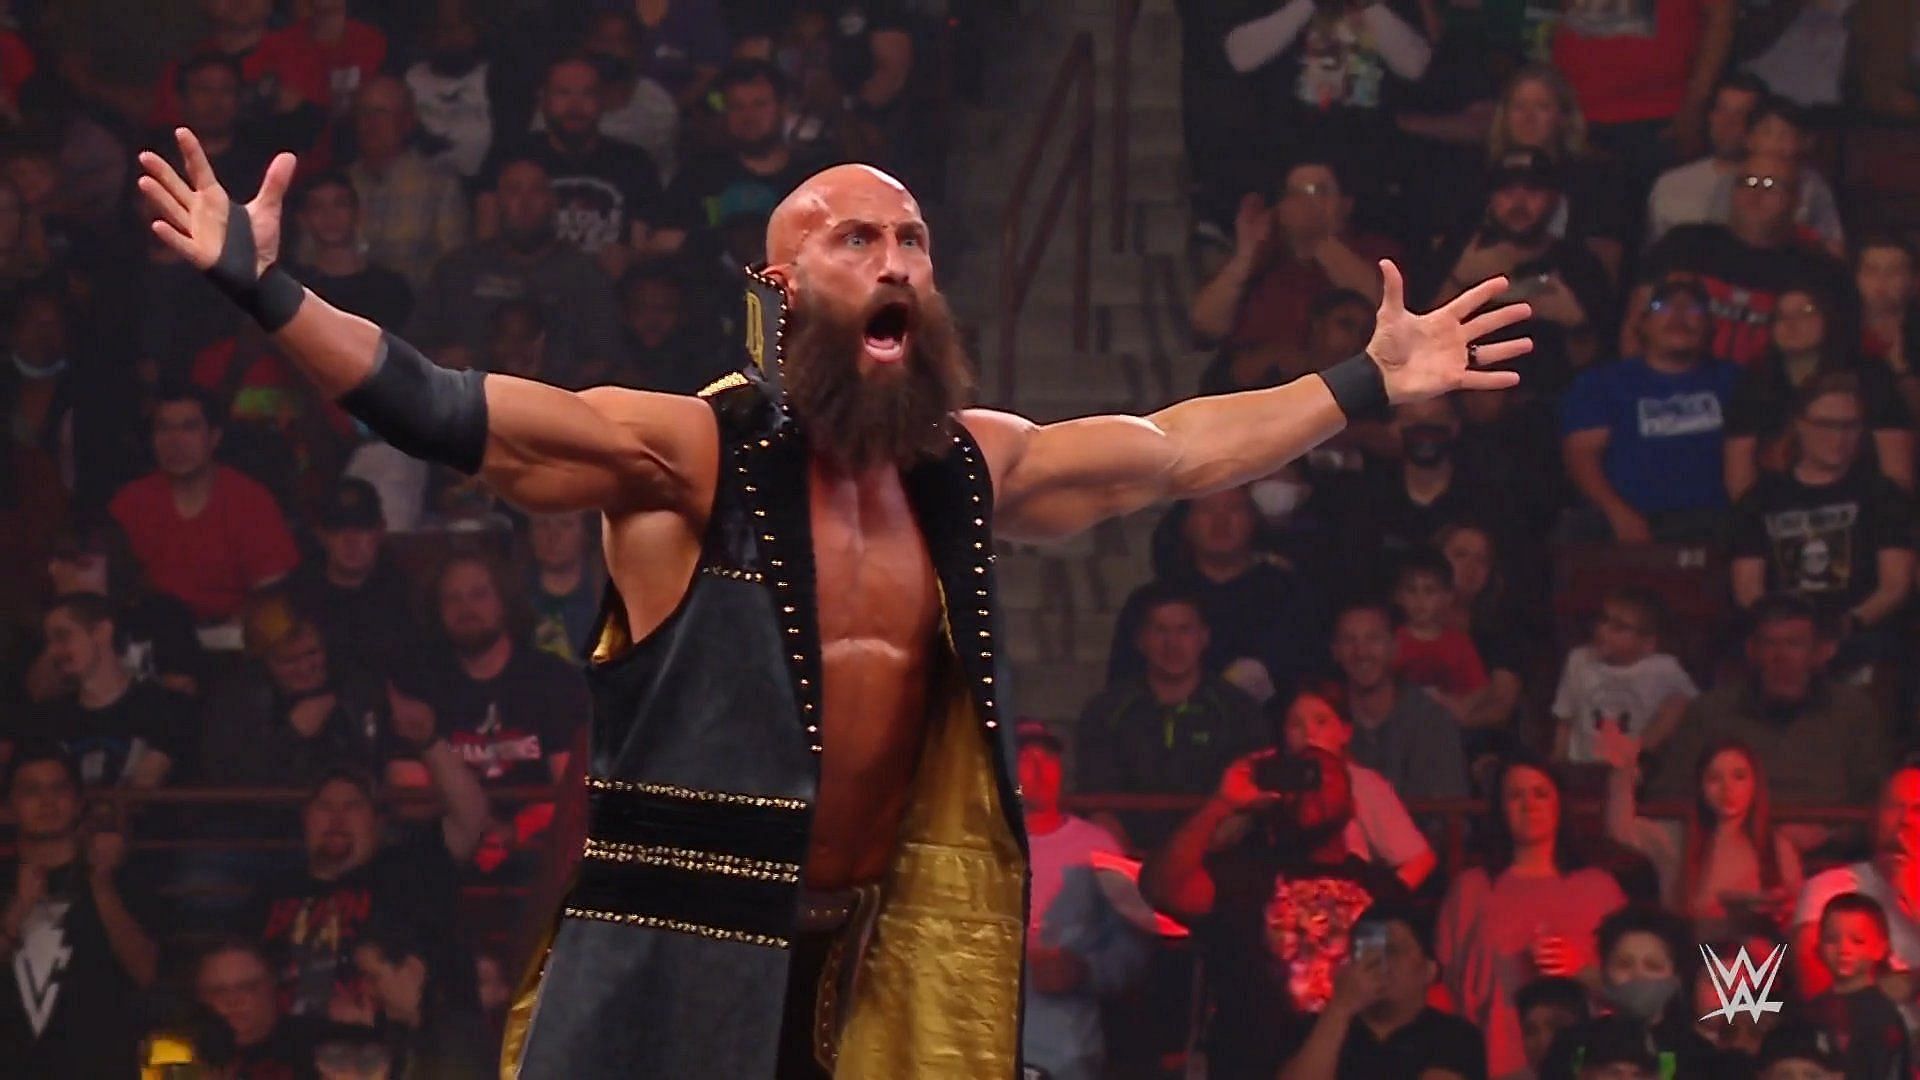 Ciampa is now officially on the WWE RAW roster